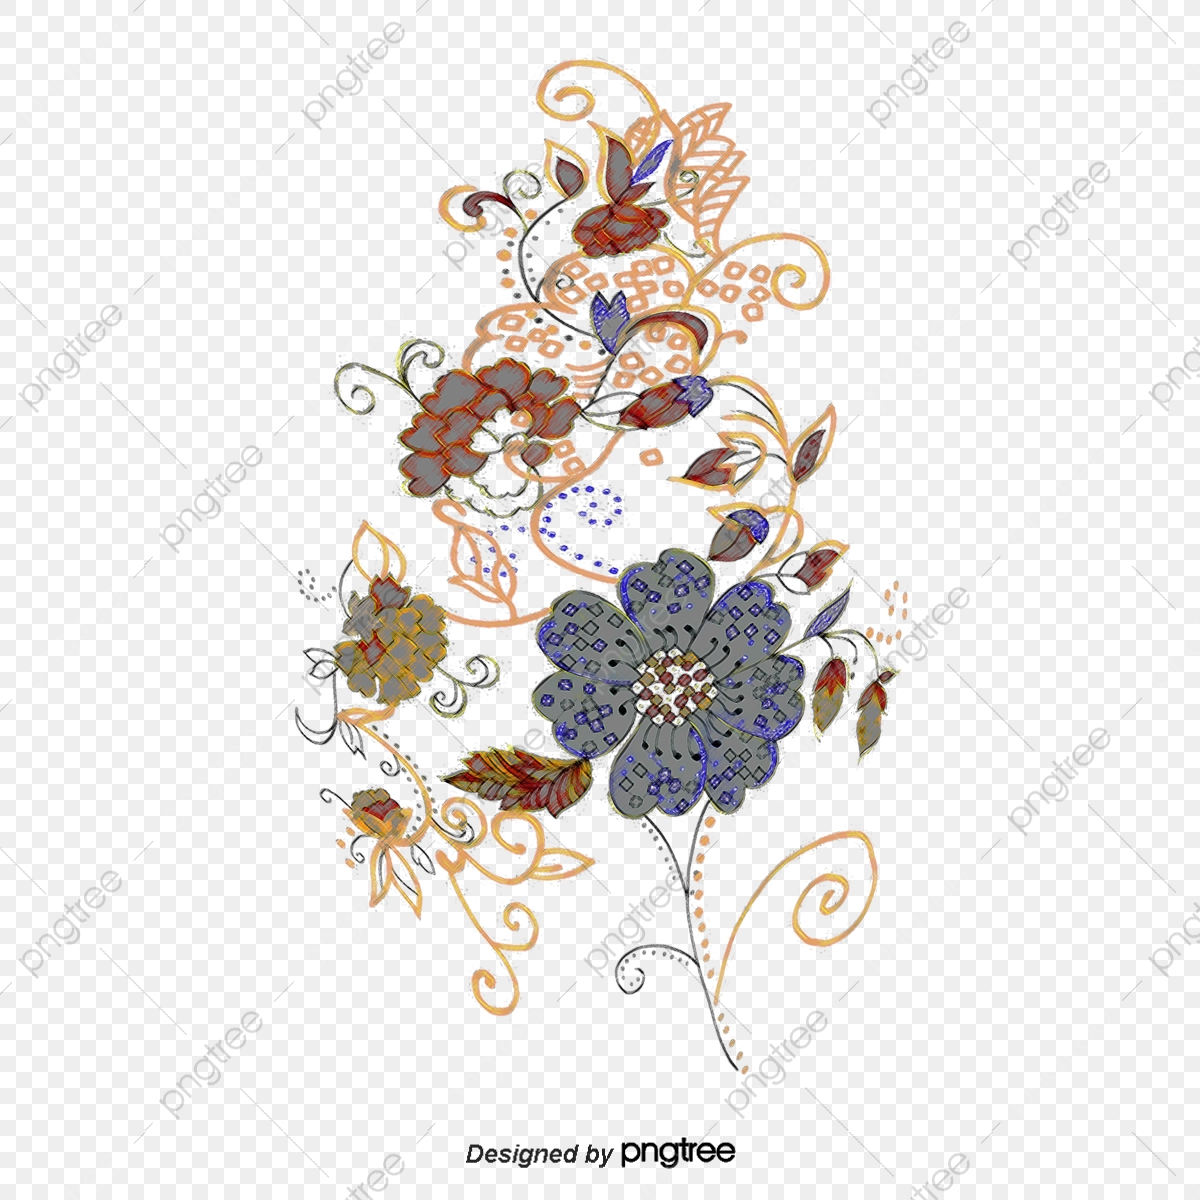 Flower Embroidery Patterns Vector Embroidery Patterns Plant Flowers Embroidery Patterns Png